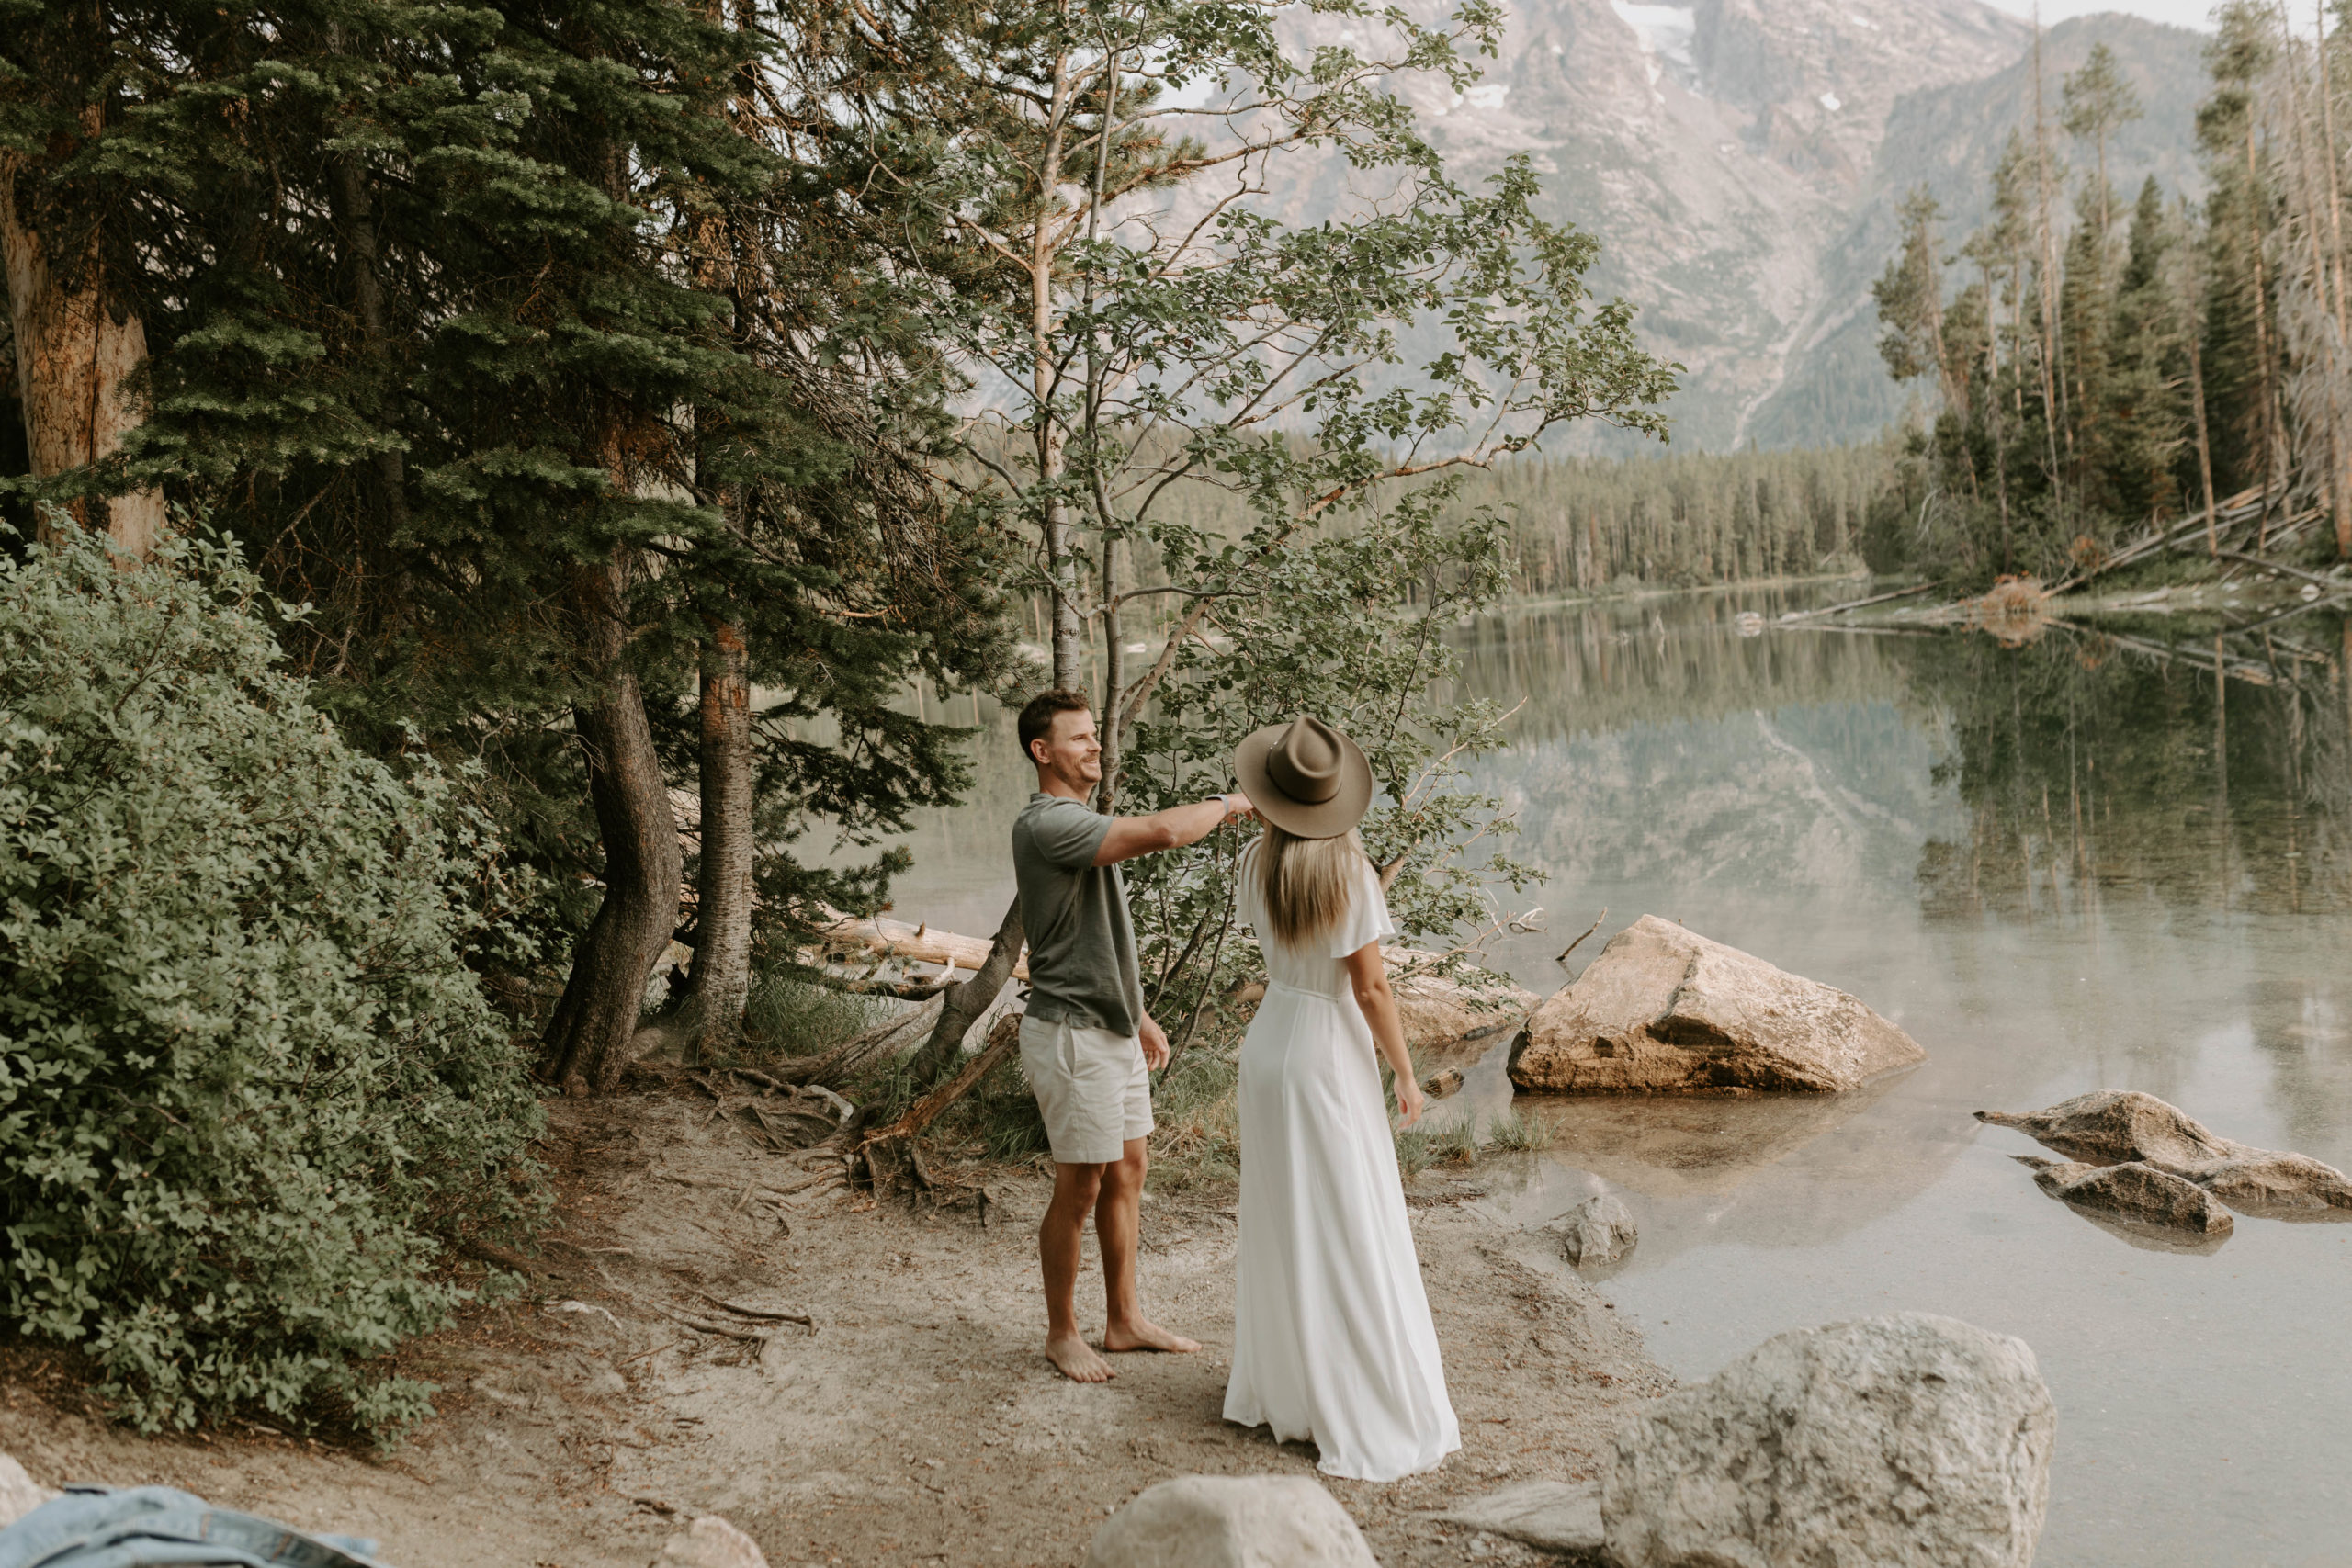 Elopement Ideas: 80 Ways to Make Your Day Special